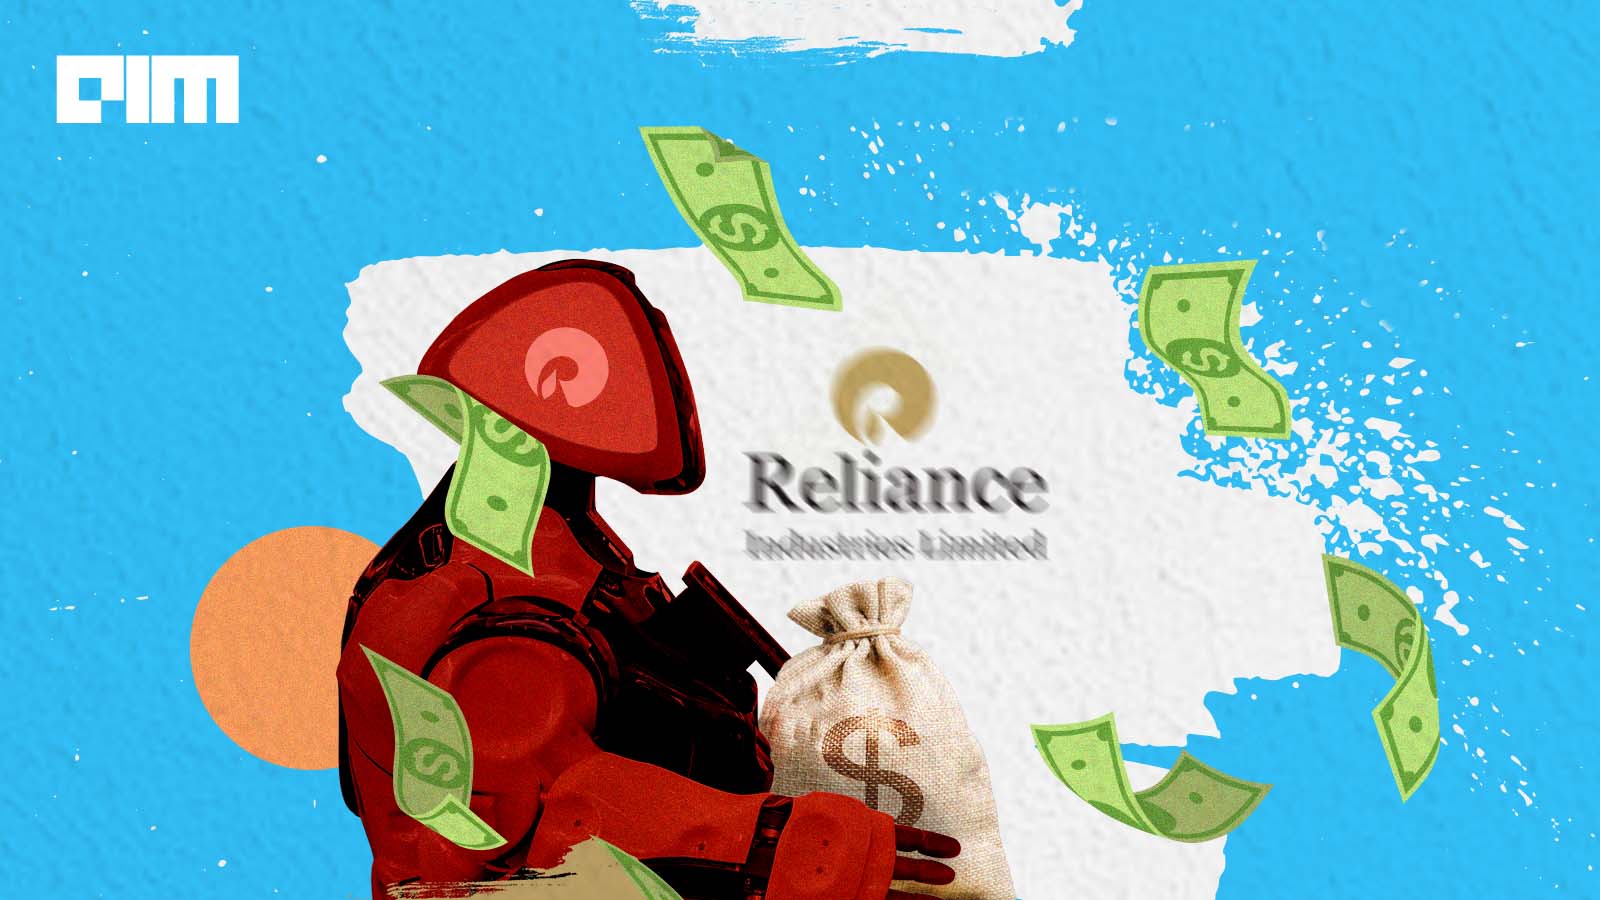 Why did Reliance pick up majority stake in a robotics startup